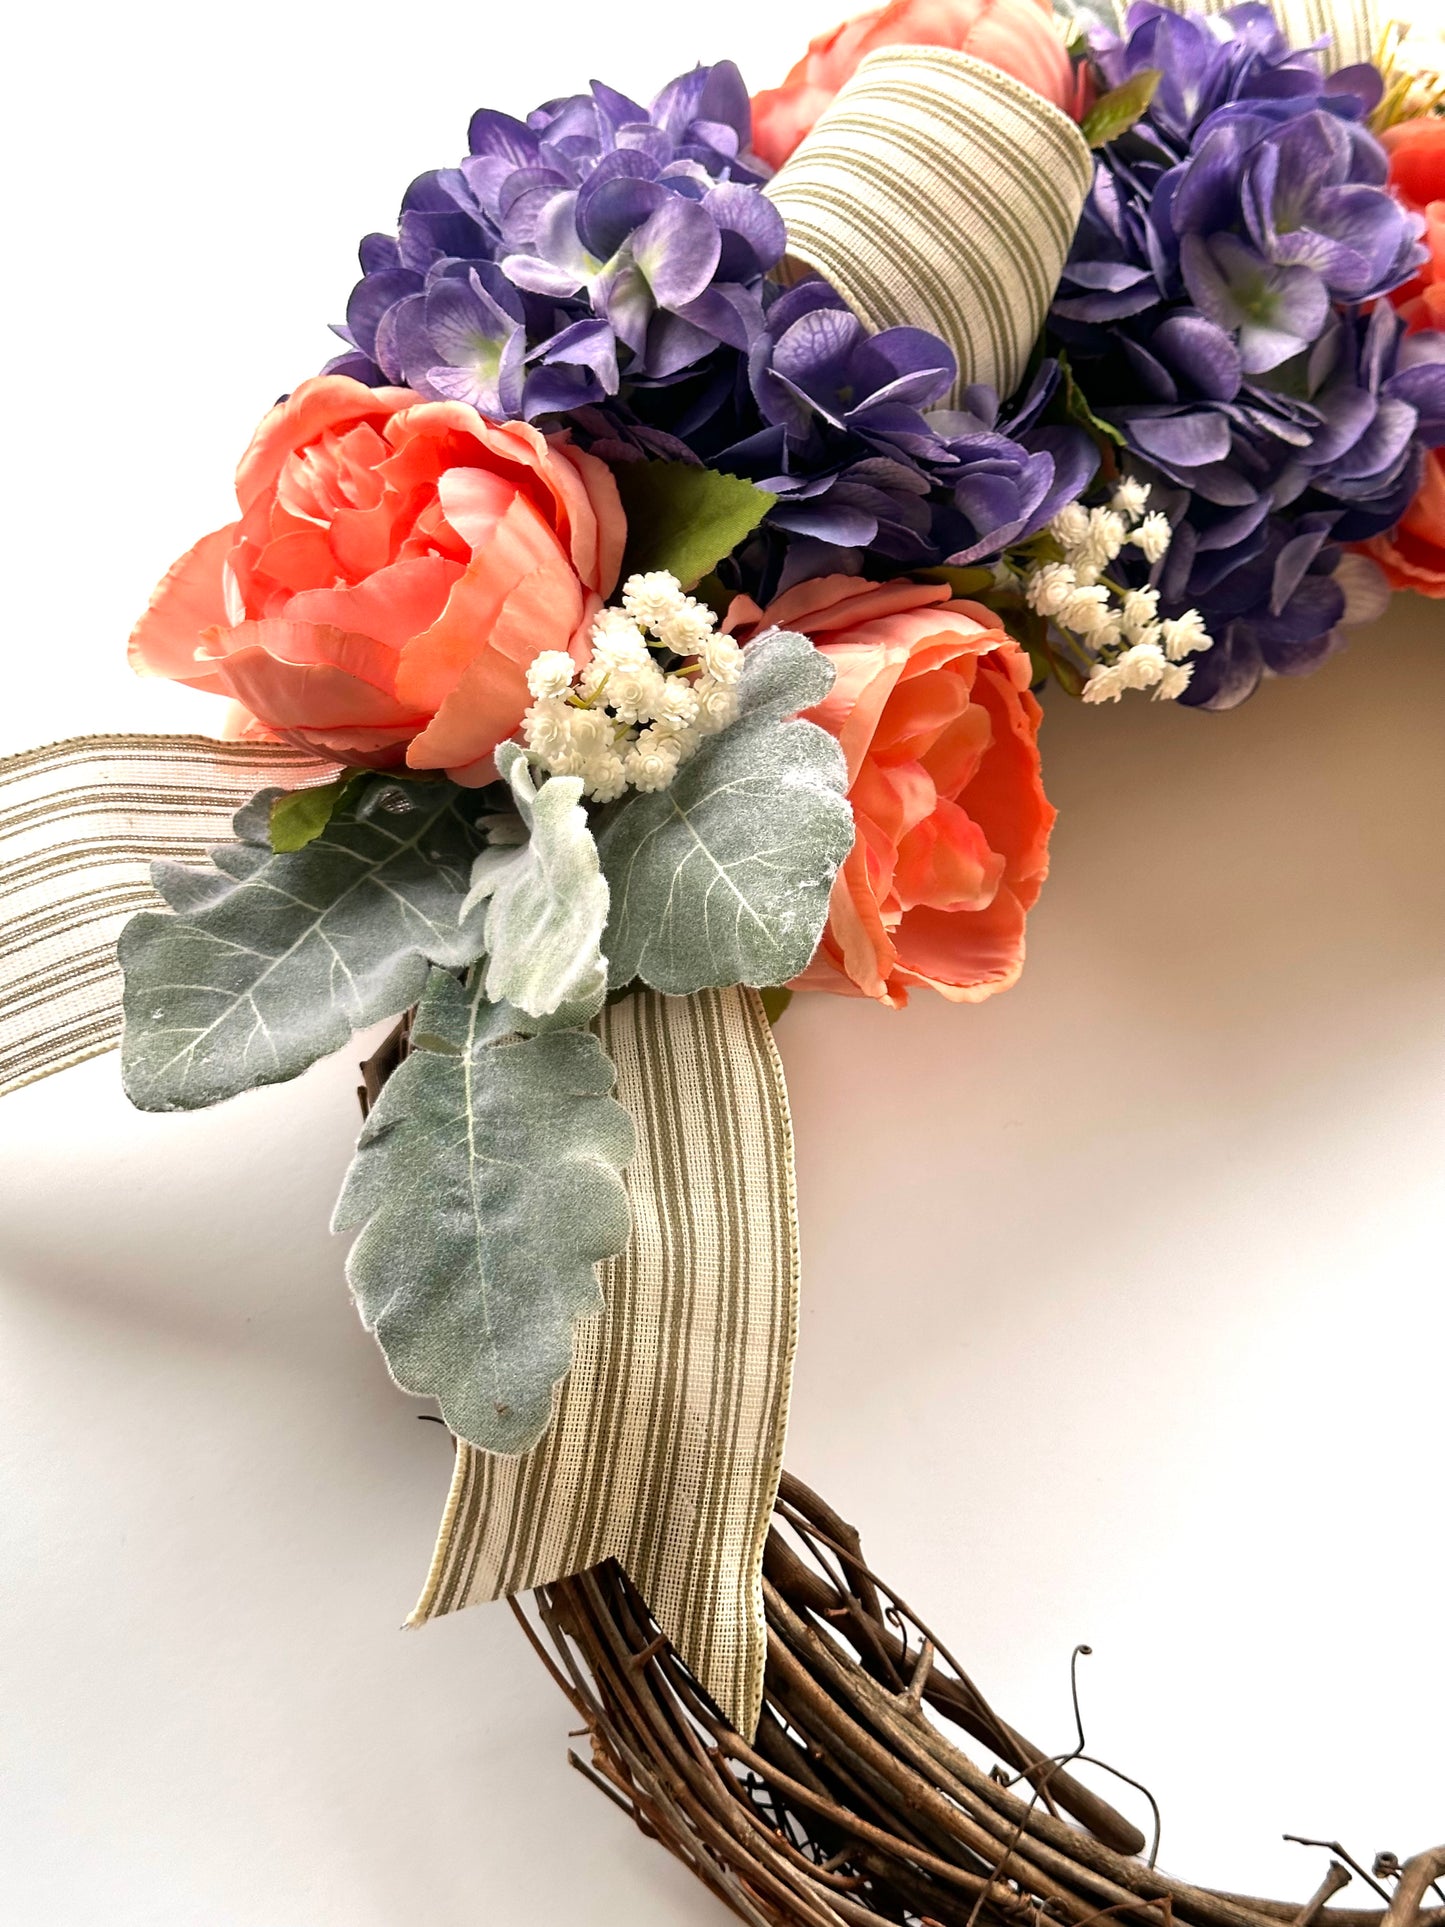 18 in. Vine Wreath with Artificial Orange Peonias and Purple Hydrangea, with Wild Greenery